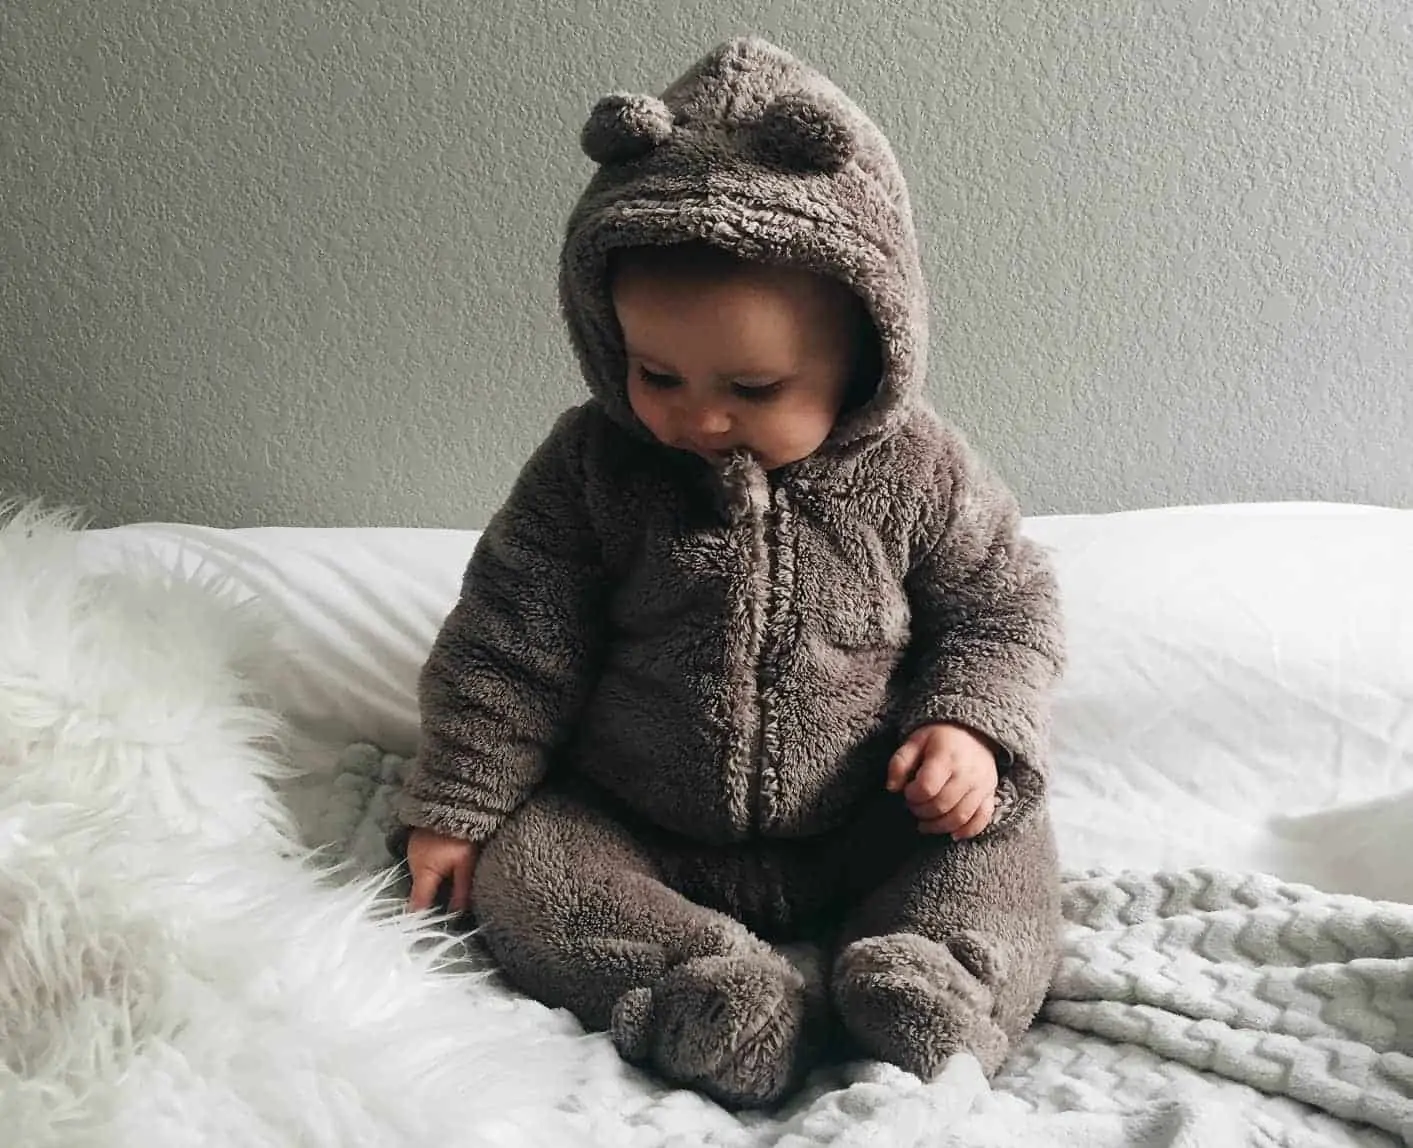 Baby in furry onesie sat on a cosy blanket